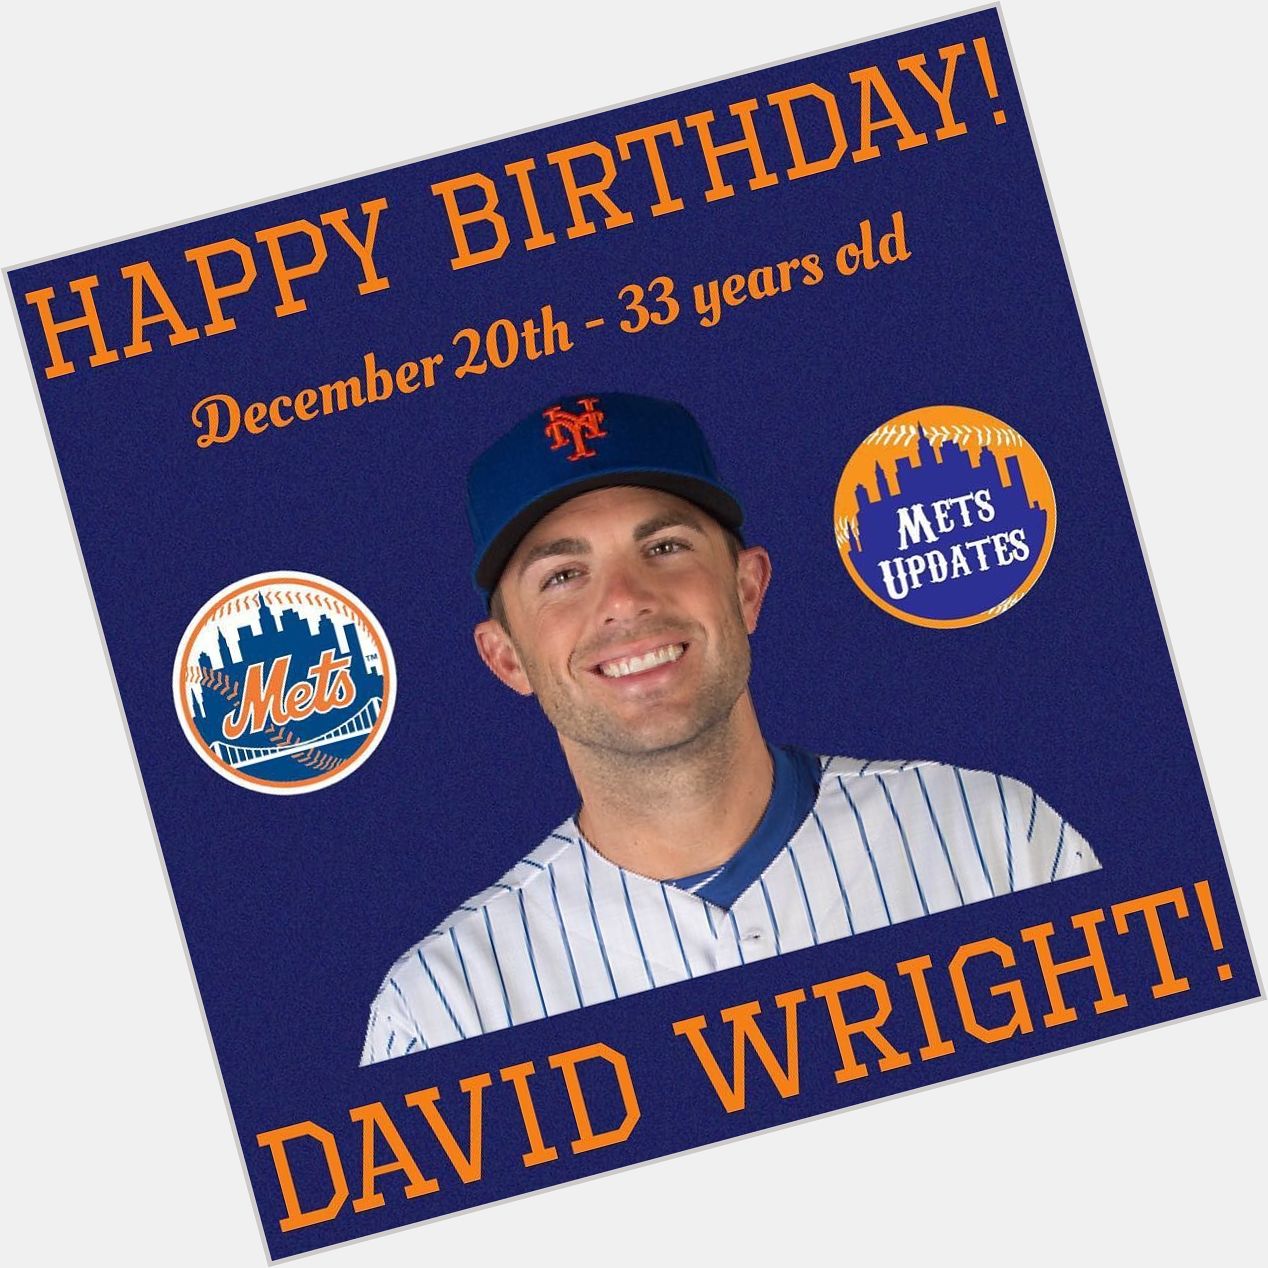  Double-Tap to wish David Wright a.k.a. The Captain a Happy Birthday!   